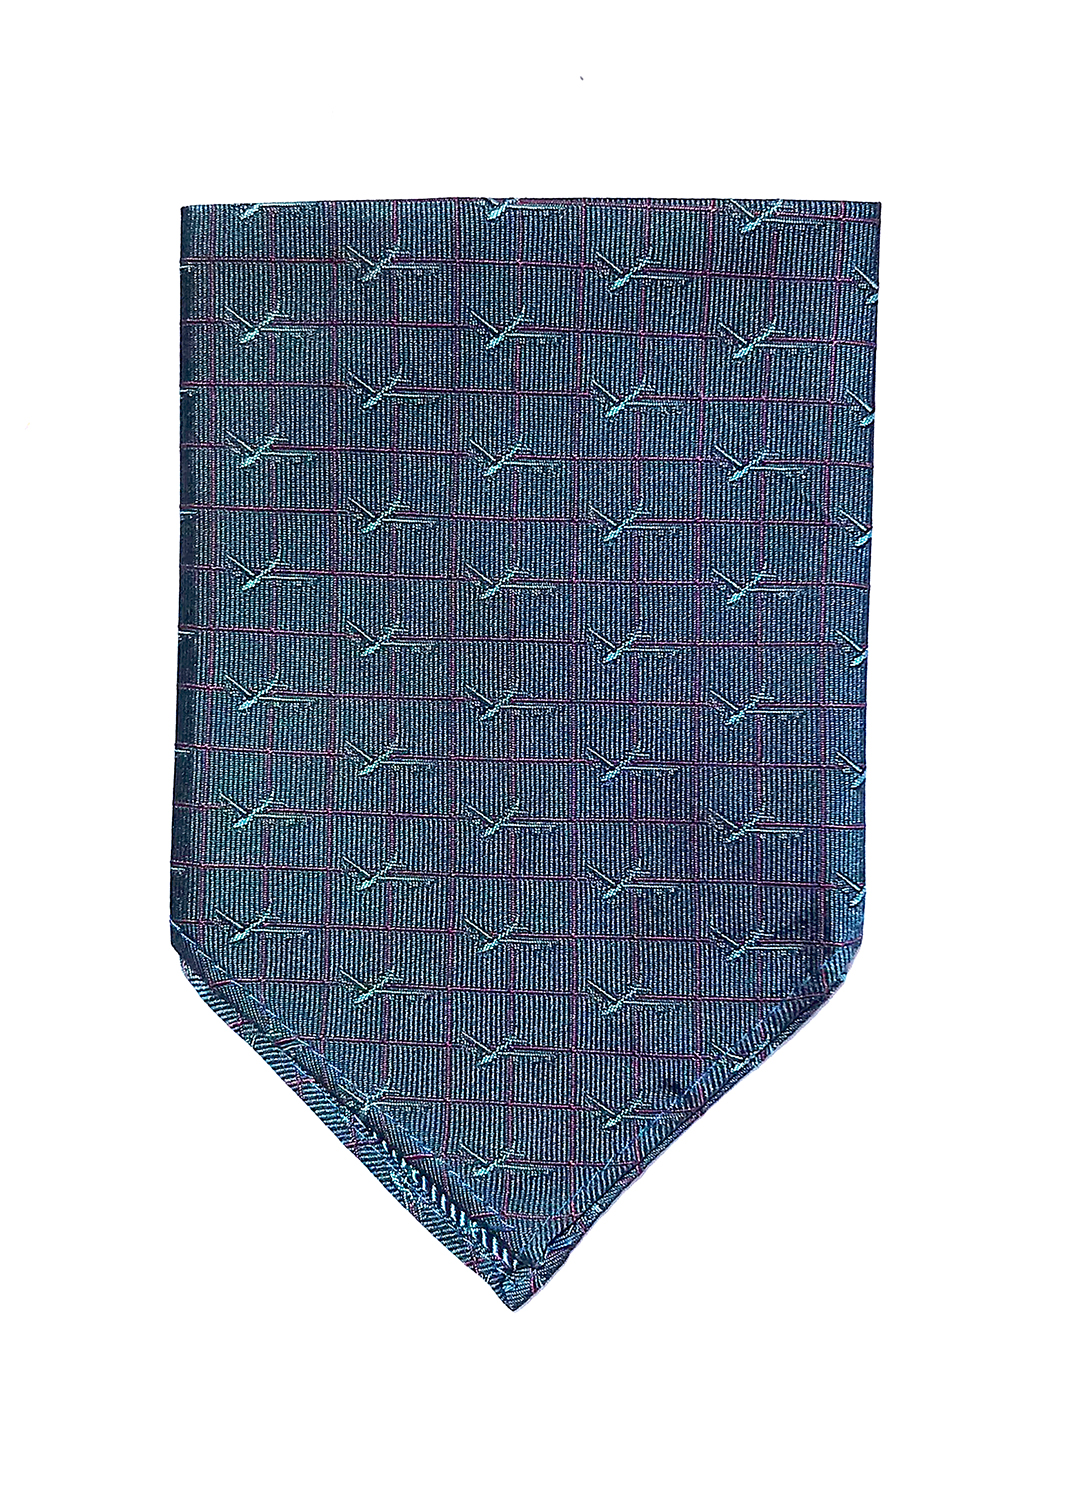 B-52 Stratofortress pocket square in deep teal